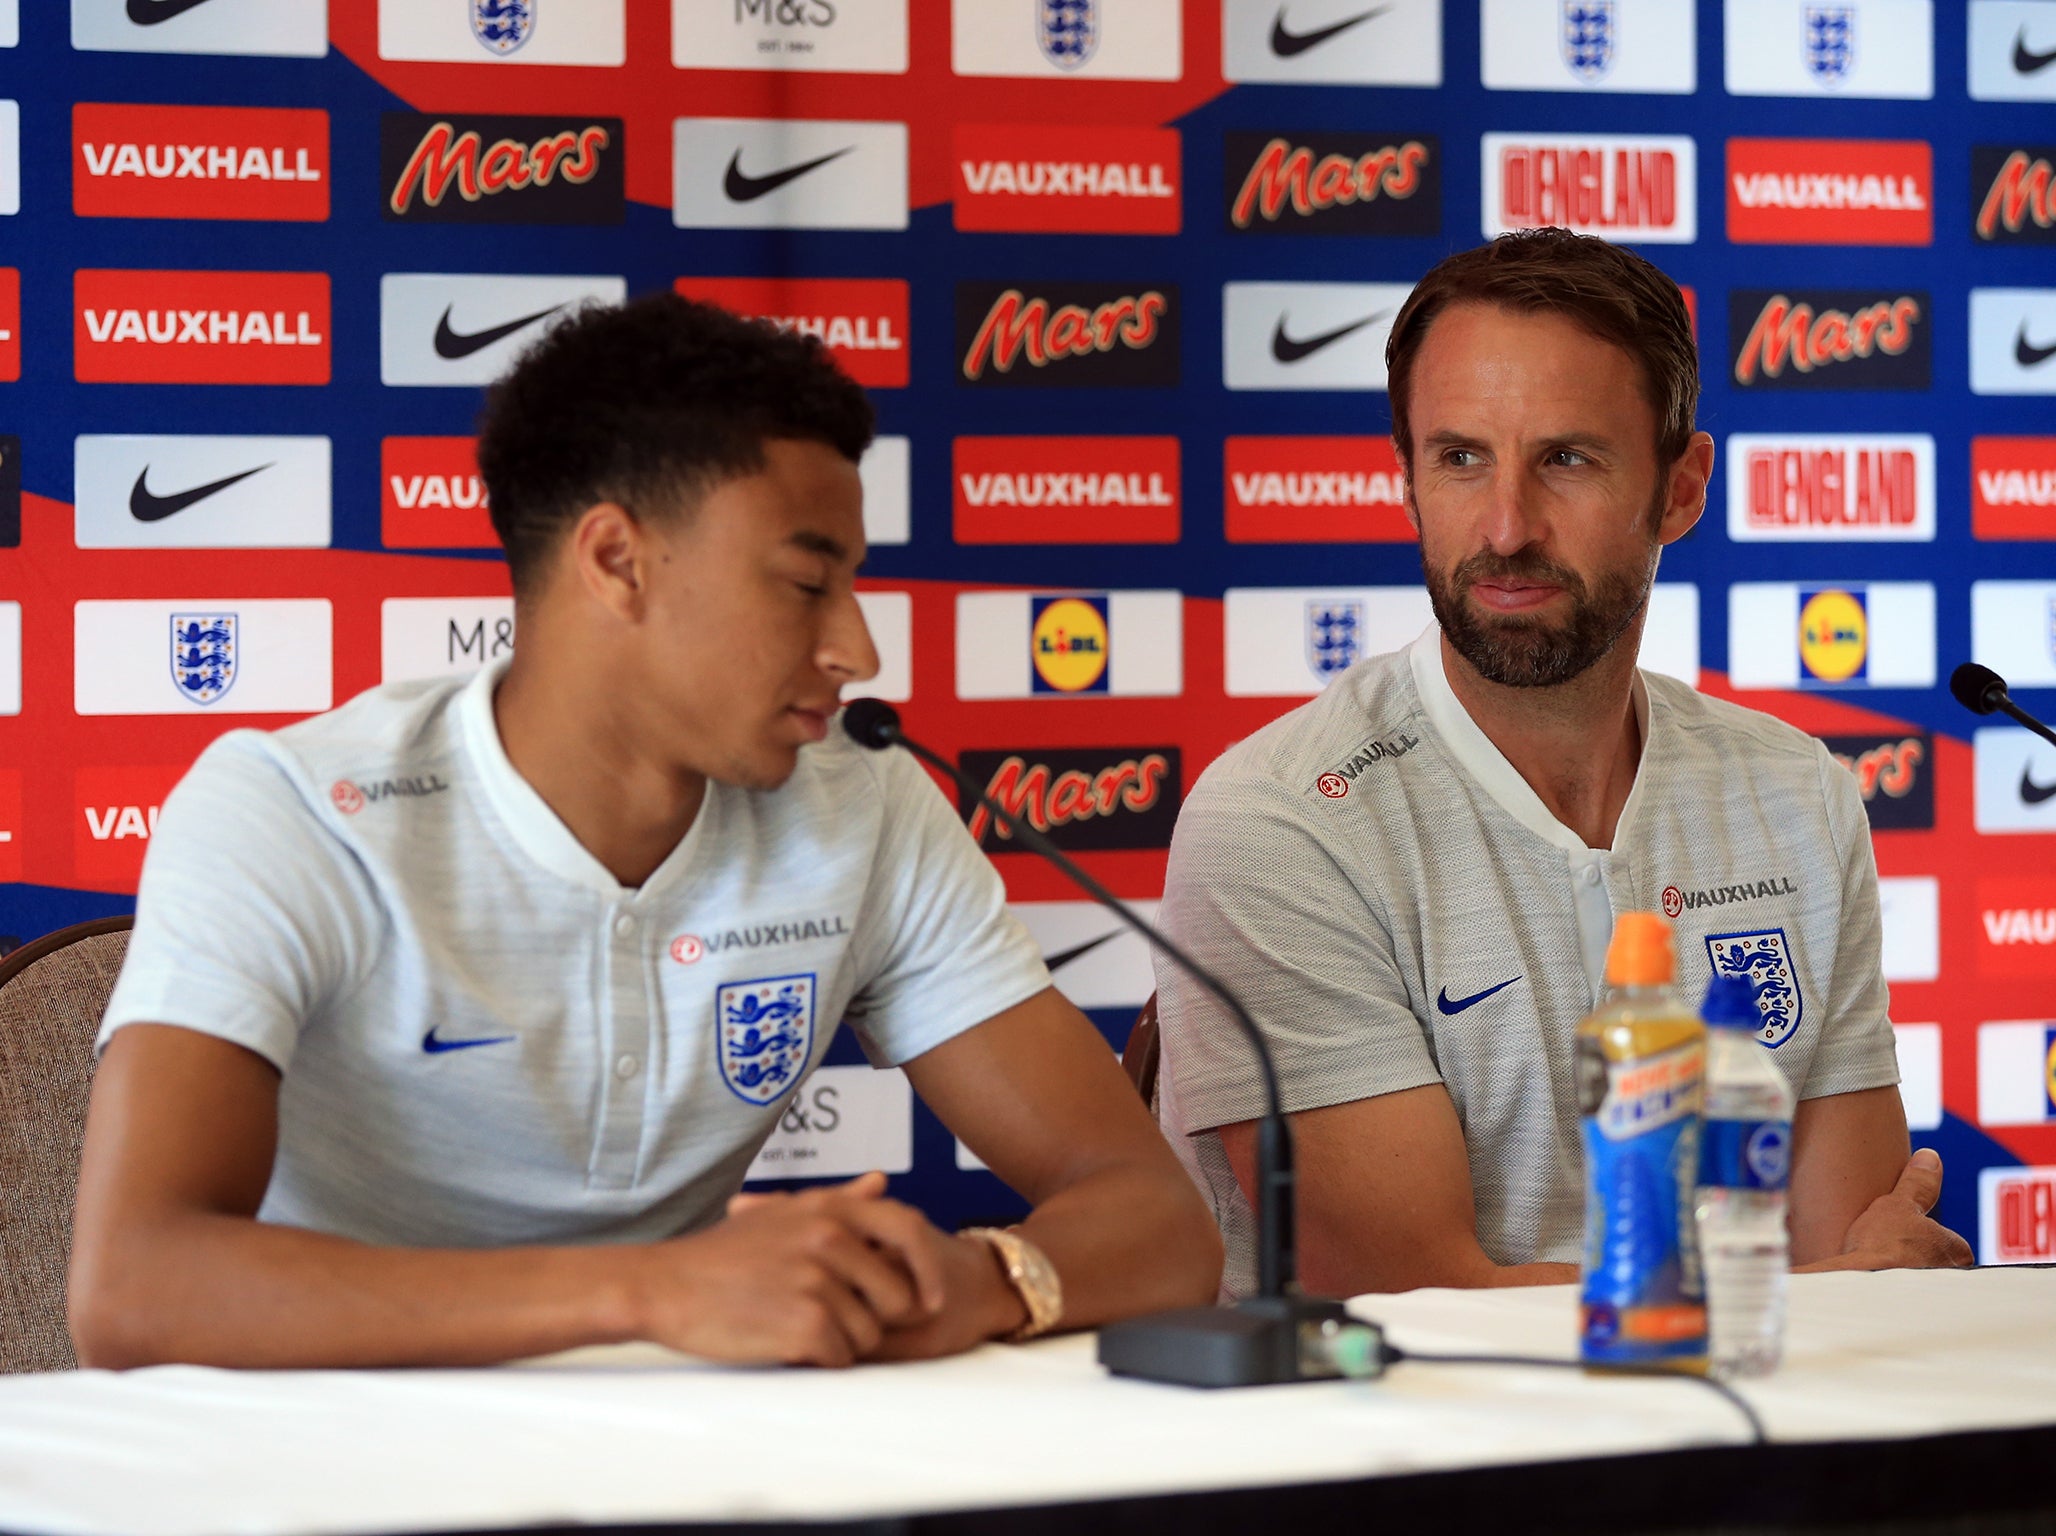 Southgate has helped to bring the best out of Lingard